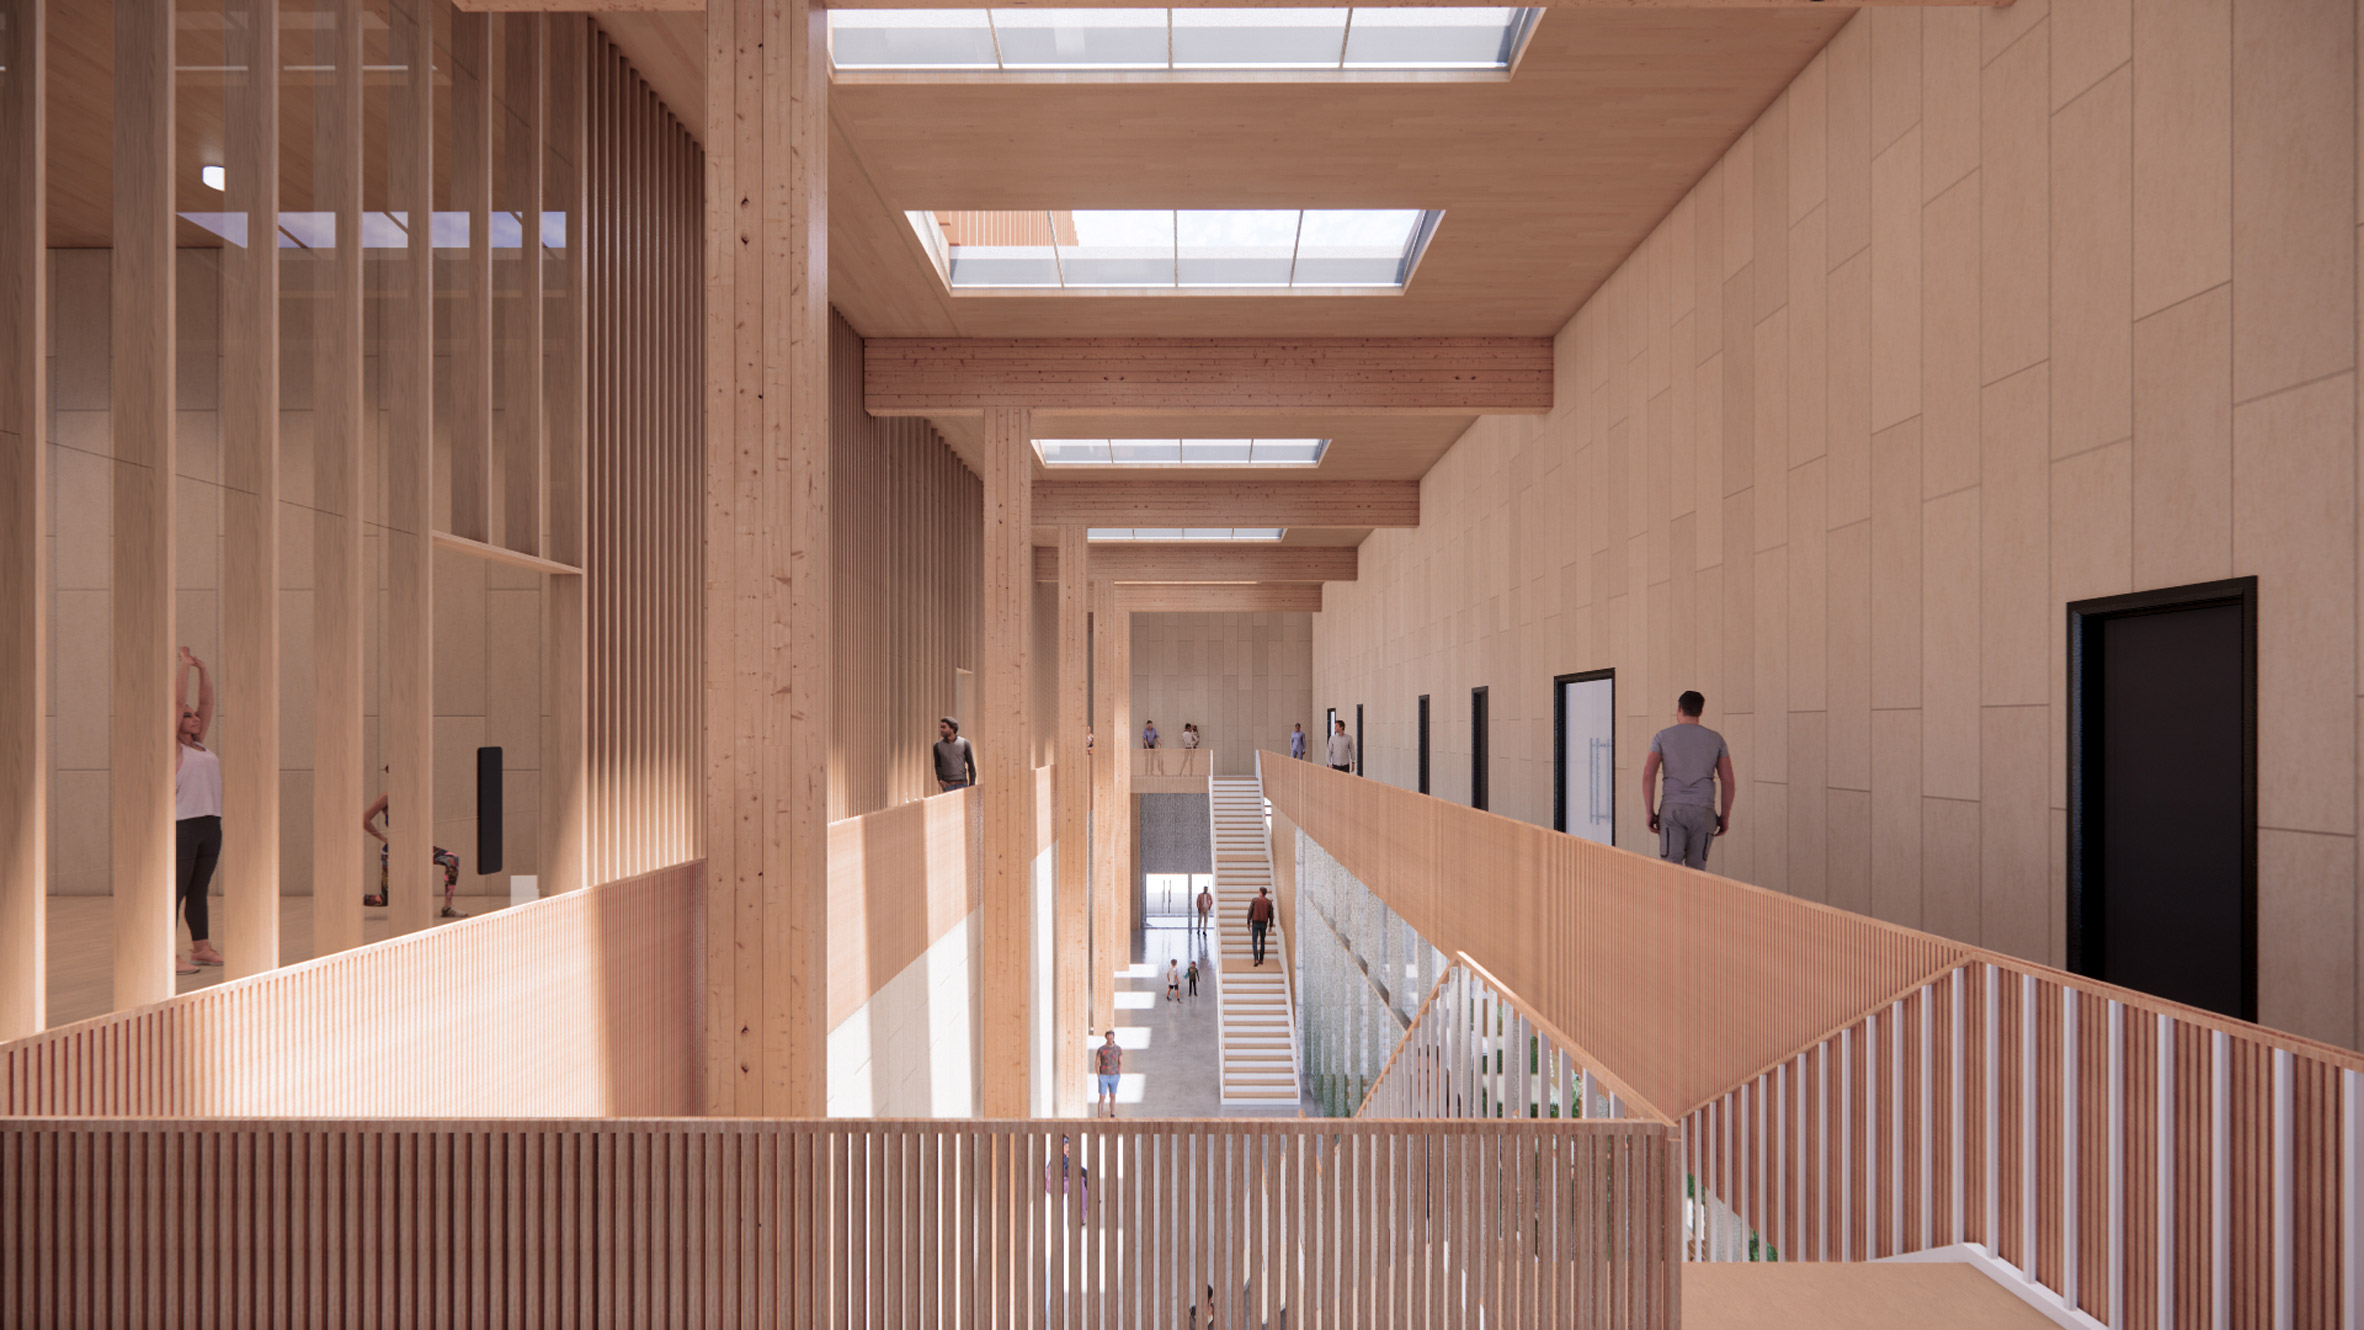 Visualisation of an interior circulation space lined with wood